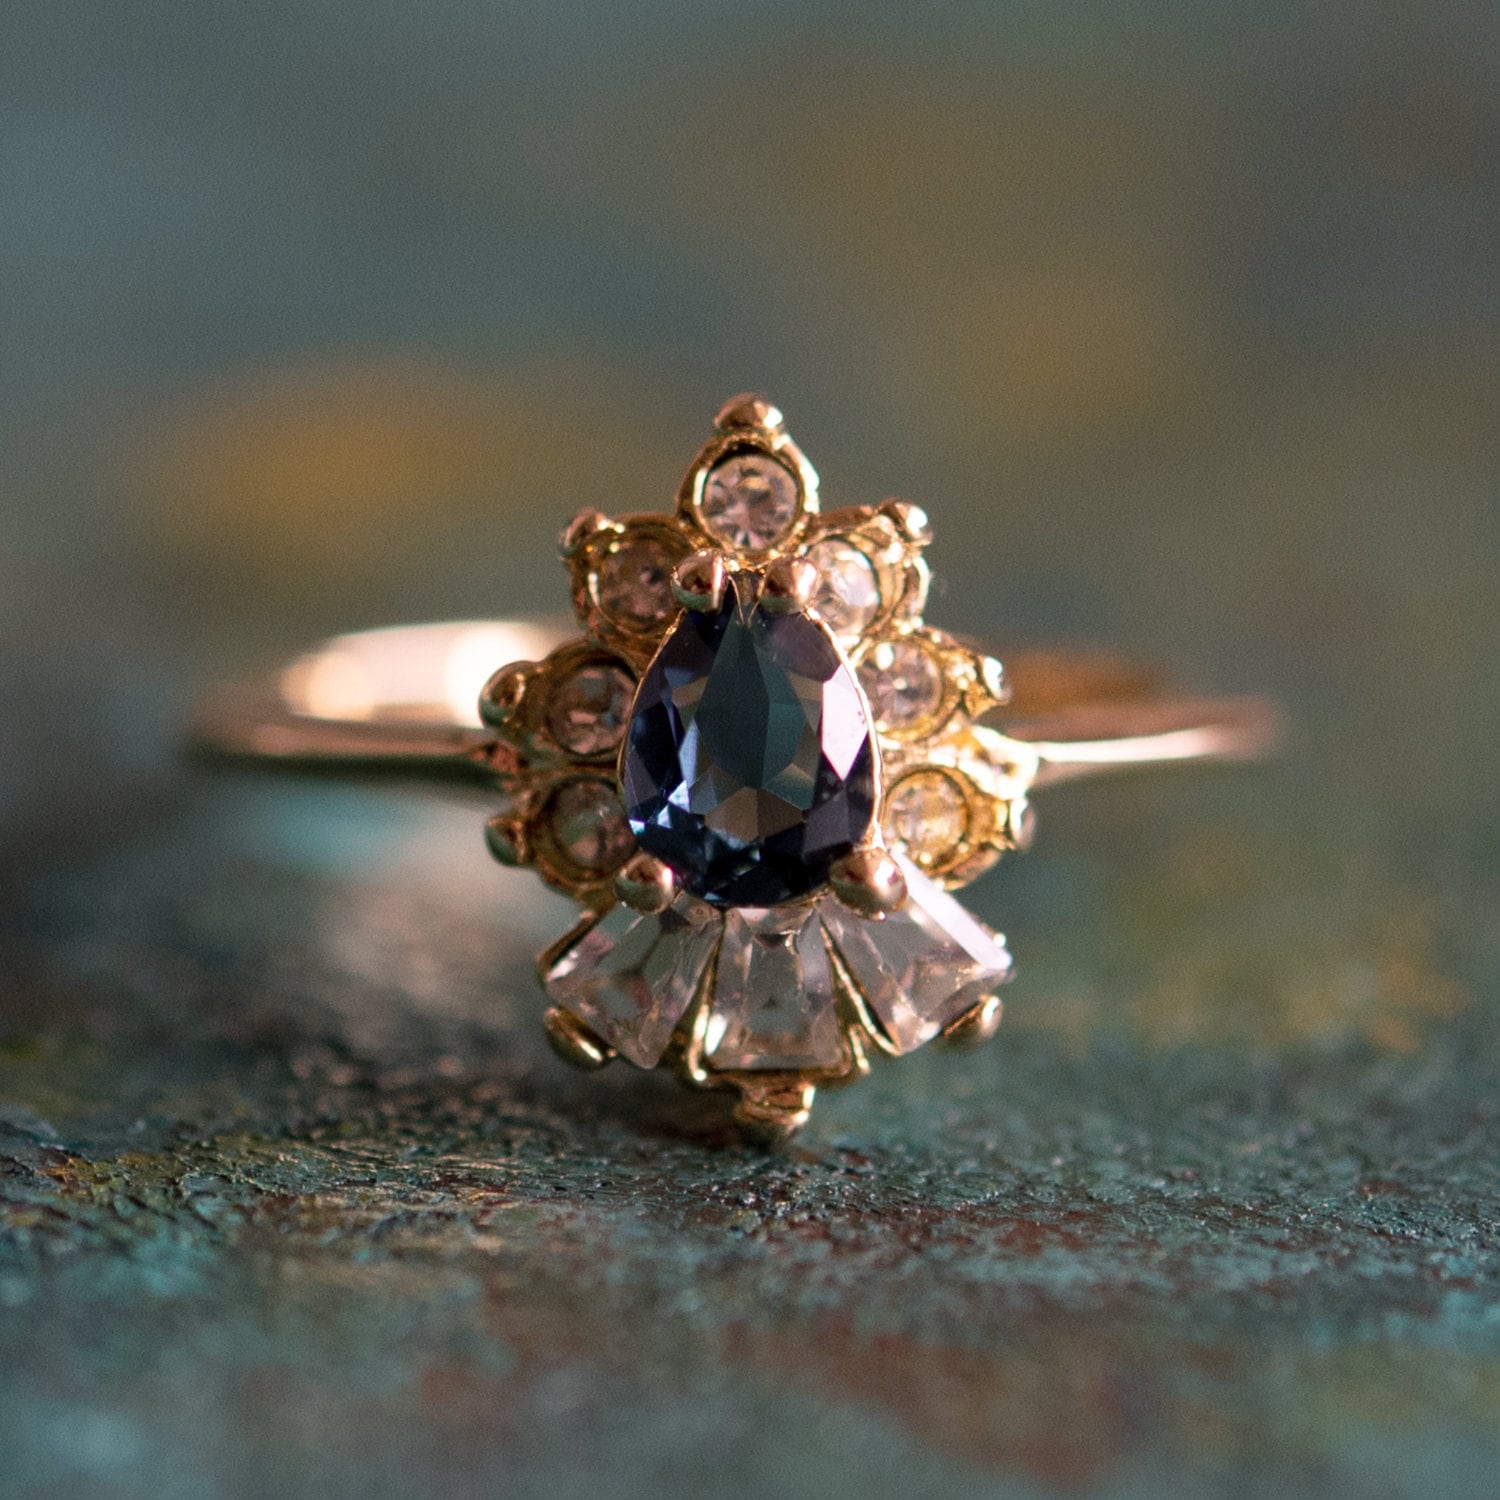 Vintage Ring 1990's Sapphire and Clear Swarovski Crystals 18k Gold Plated Ring R3093 Antique Womans Jewelry - Limited Stock - Never Worn